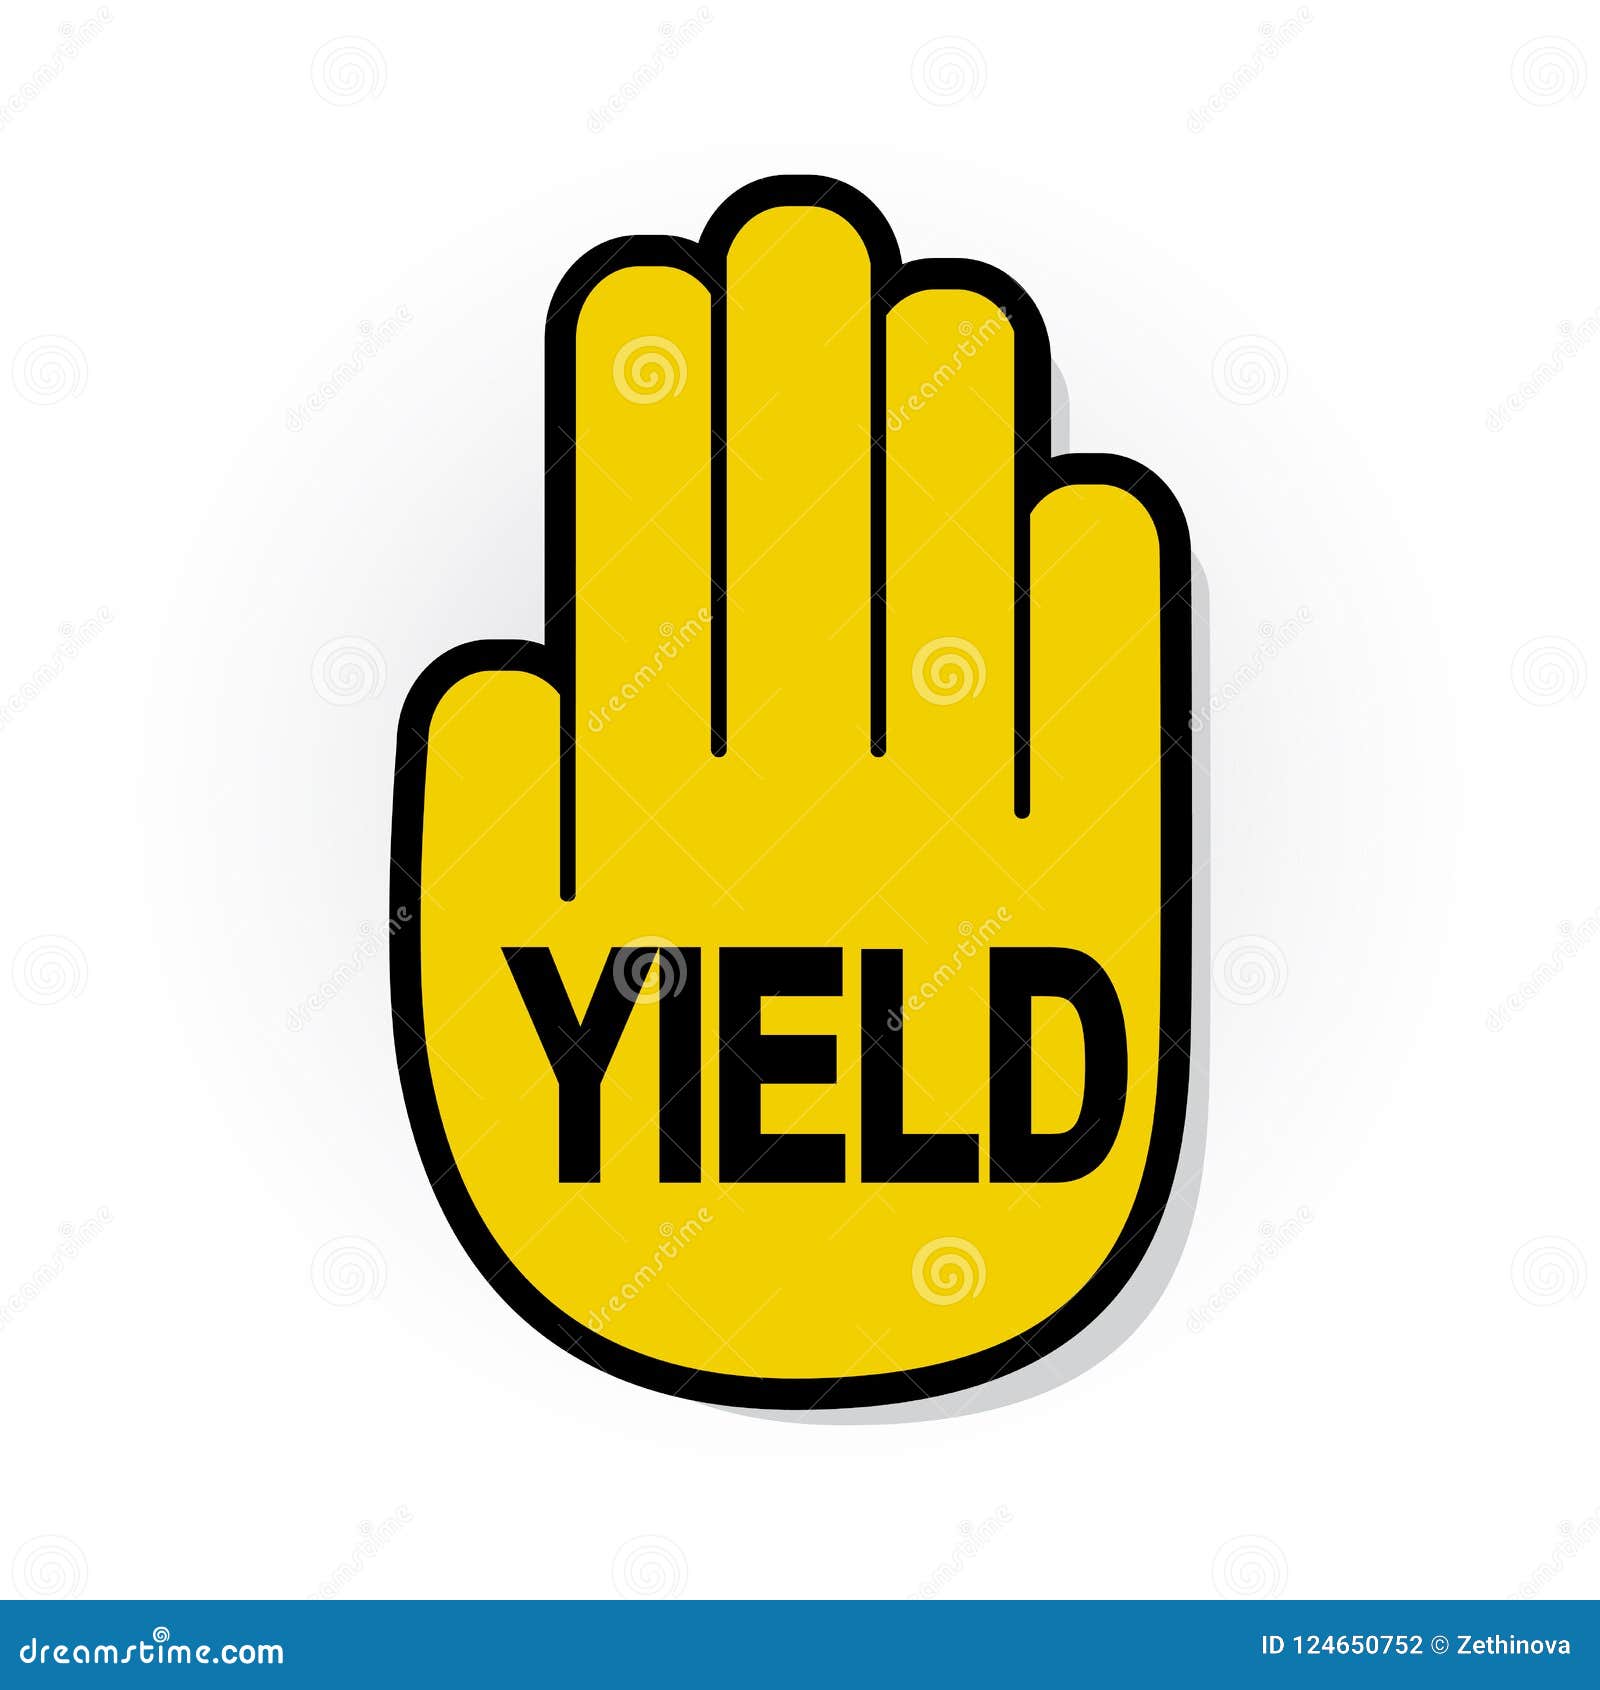 yield hand sign